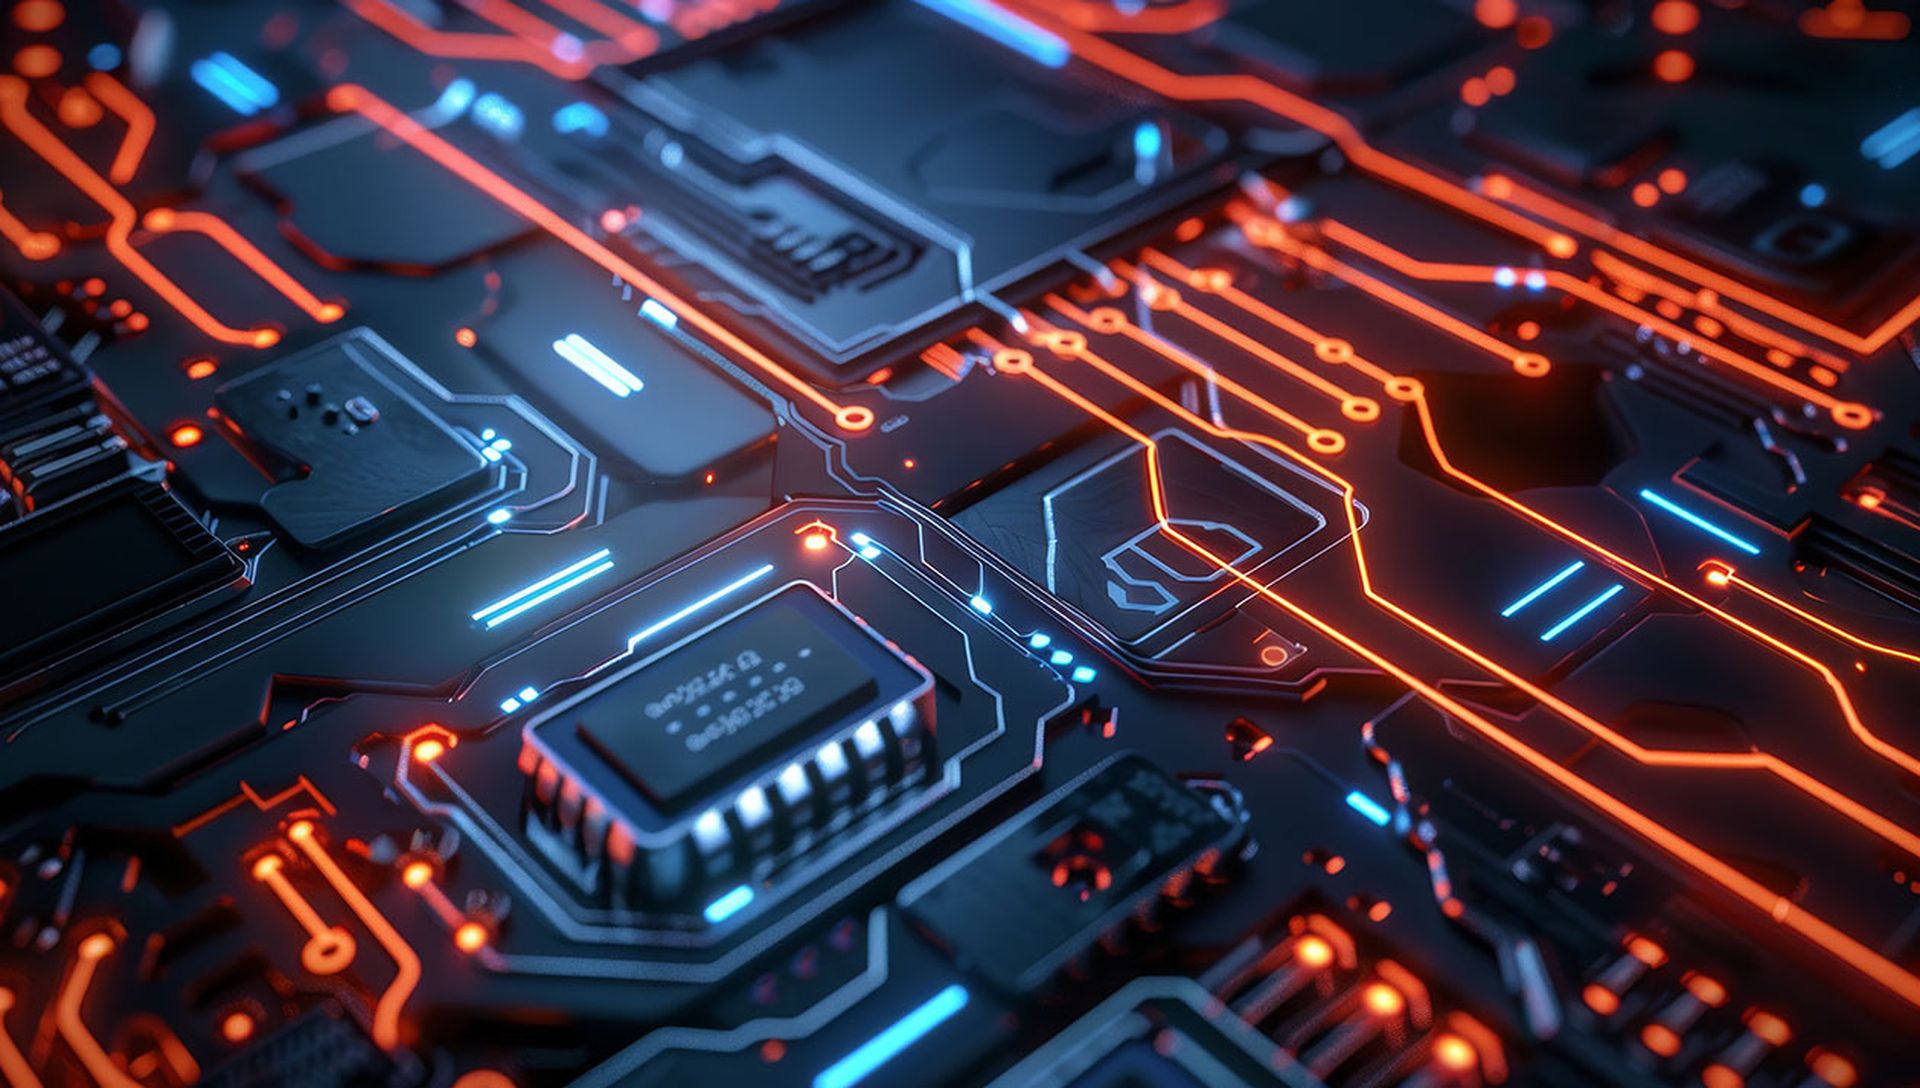 Closeup of an intricate circuit board with glowing lights, representing the complex inner proportions and patterns in technology. The vibrant colors symbolize energy and data flow through connections